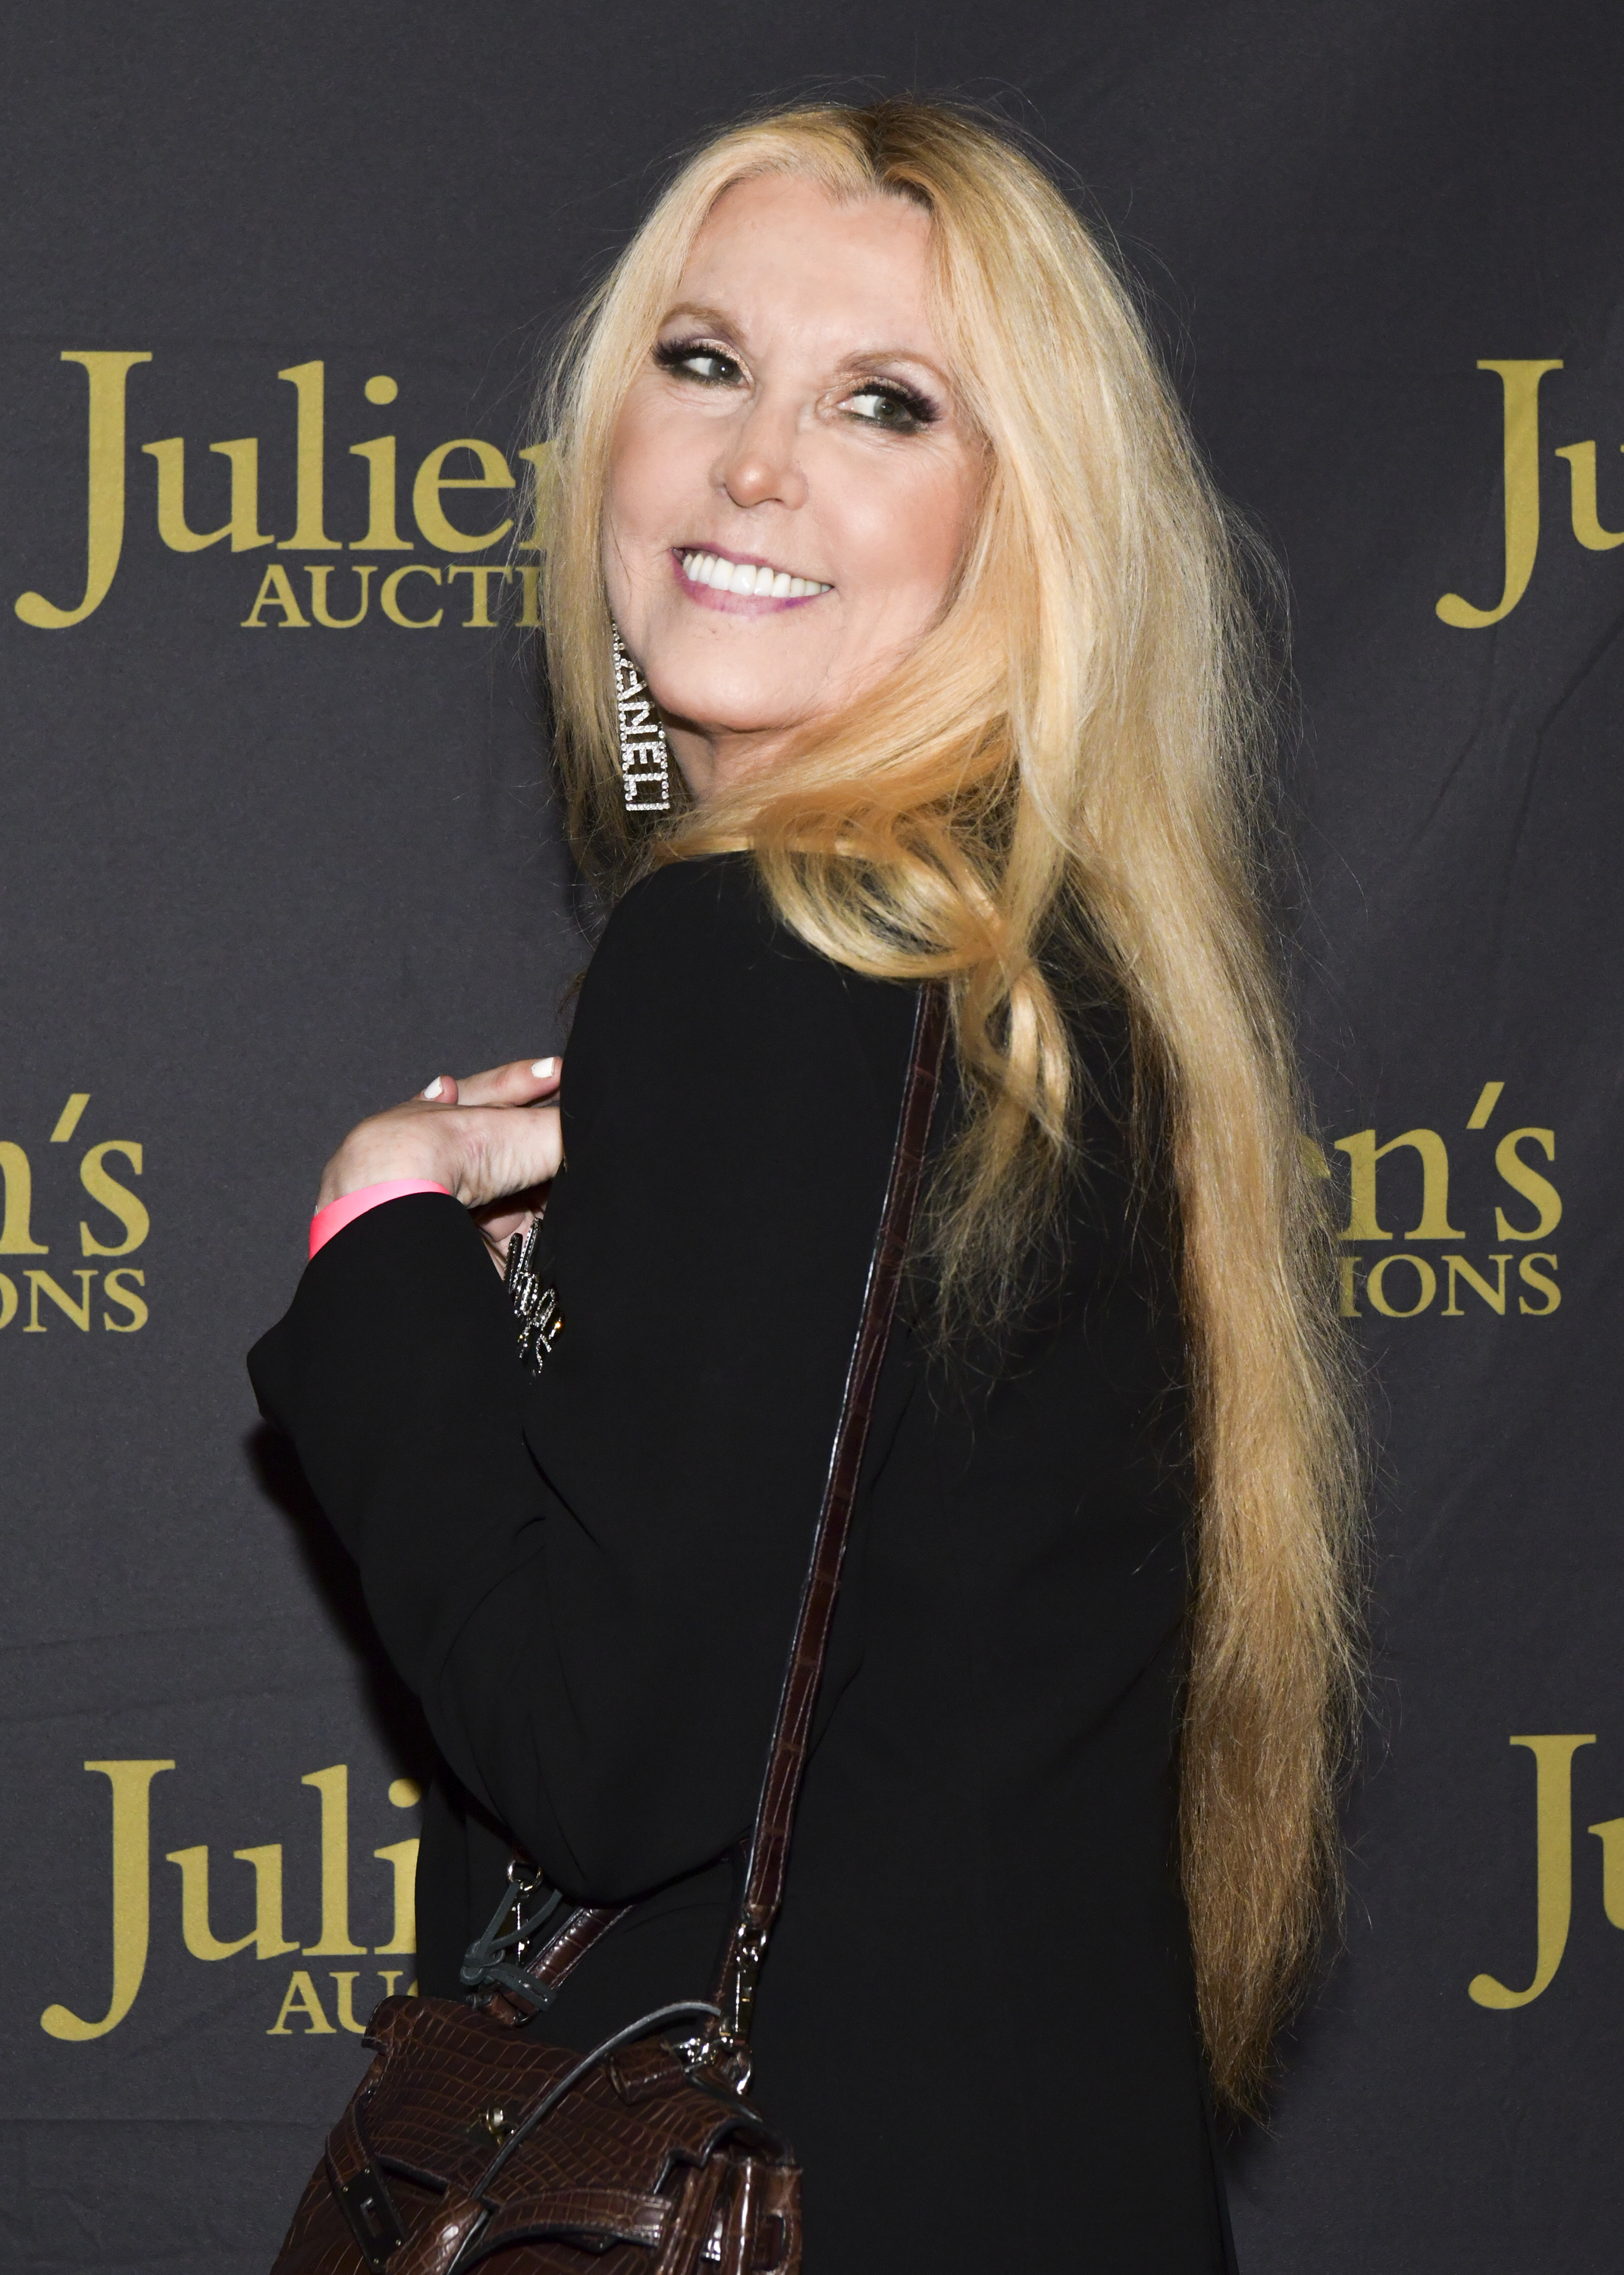 Joan Celia Lee during the VIP reception for "Property of Olivia Newton-John Auction Event" at Julien’s Auctions on October 29, 2019, in Beverly Hills, California. | Source: Getty Images